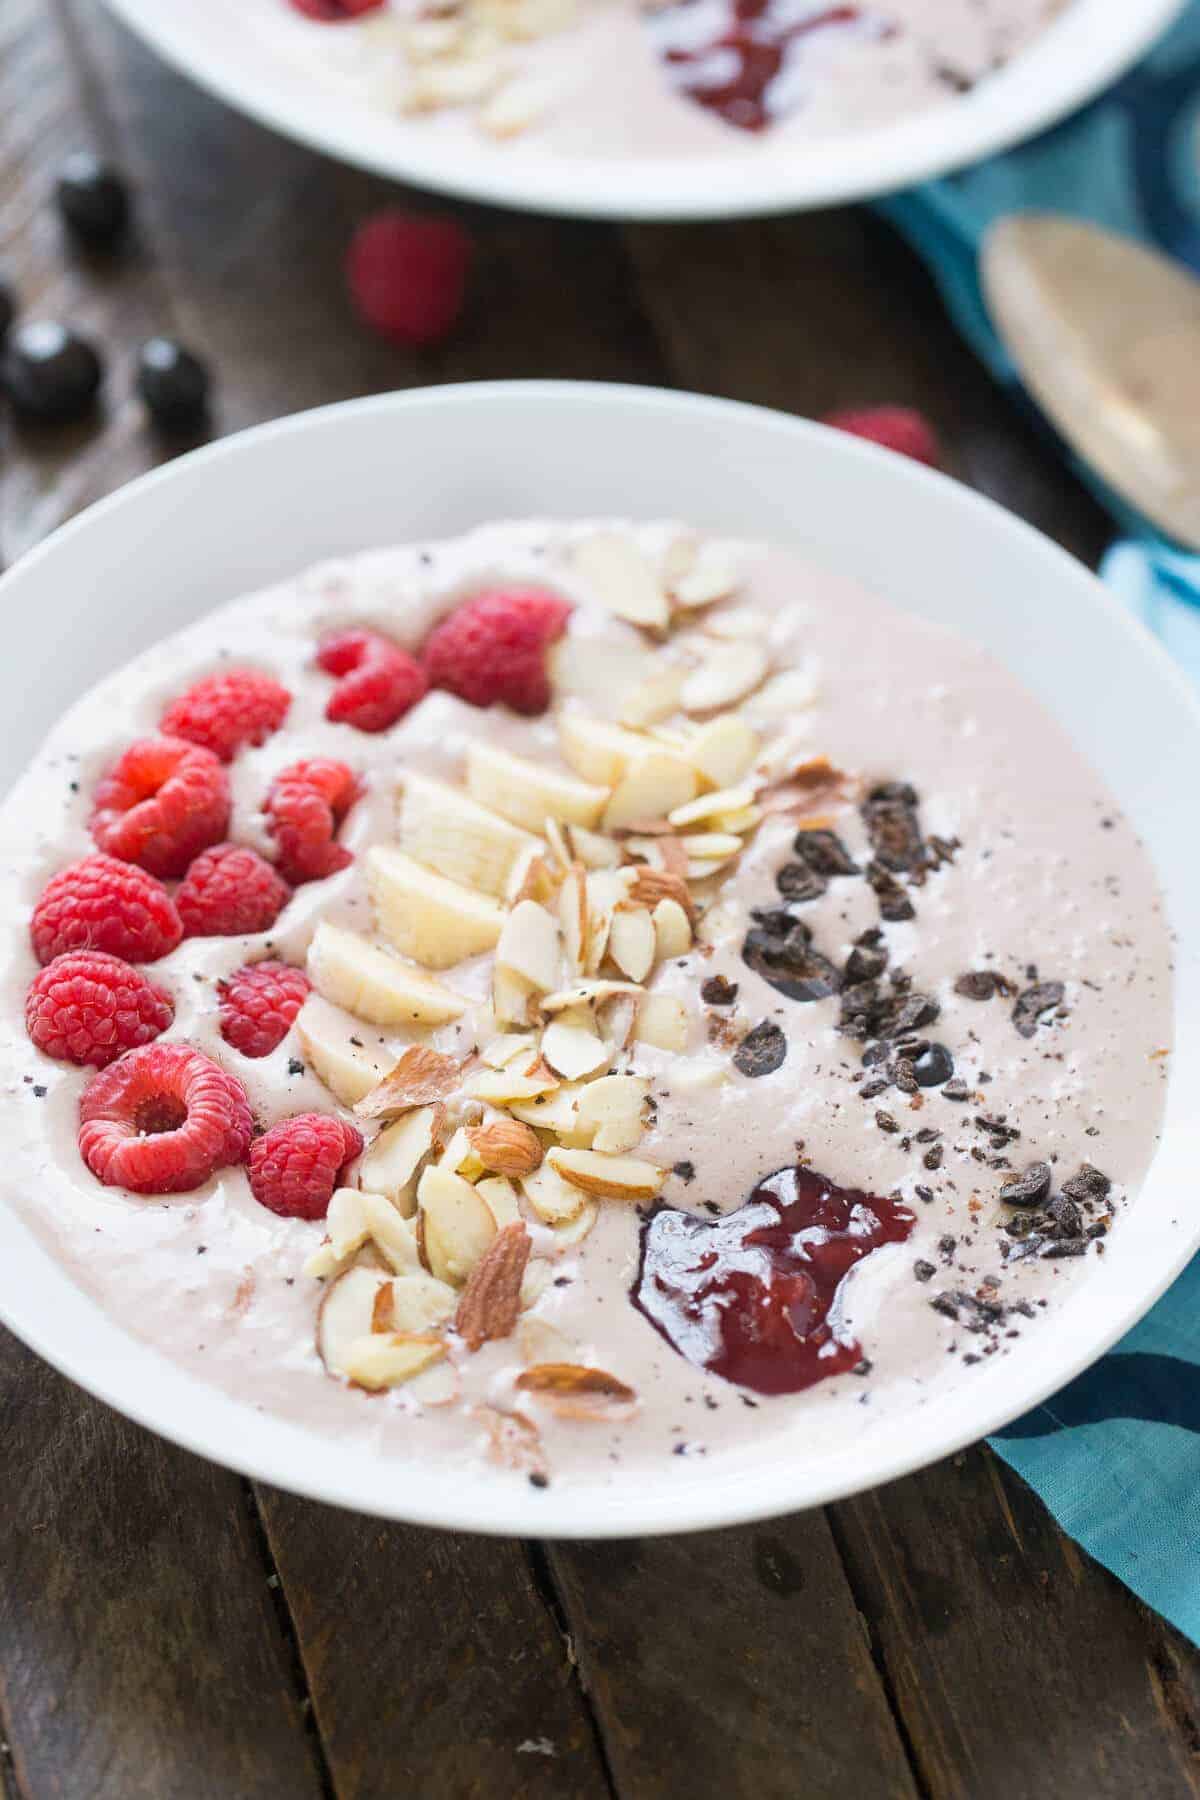 This smoothie bowl has a hint of mocha, strawberry and fresh fruit! The chocolate covered coffee beans make it a stand out! lemonsforlulu.com